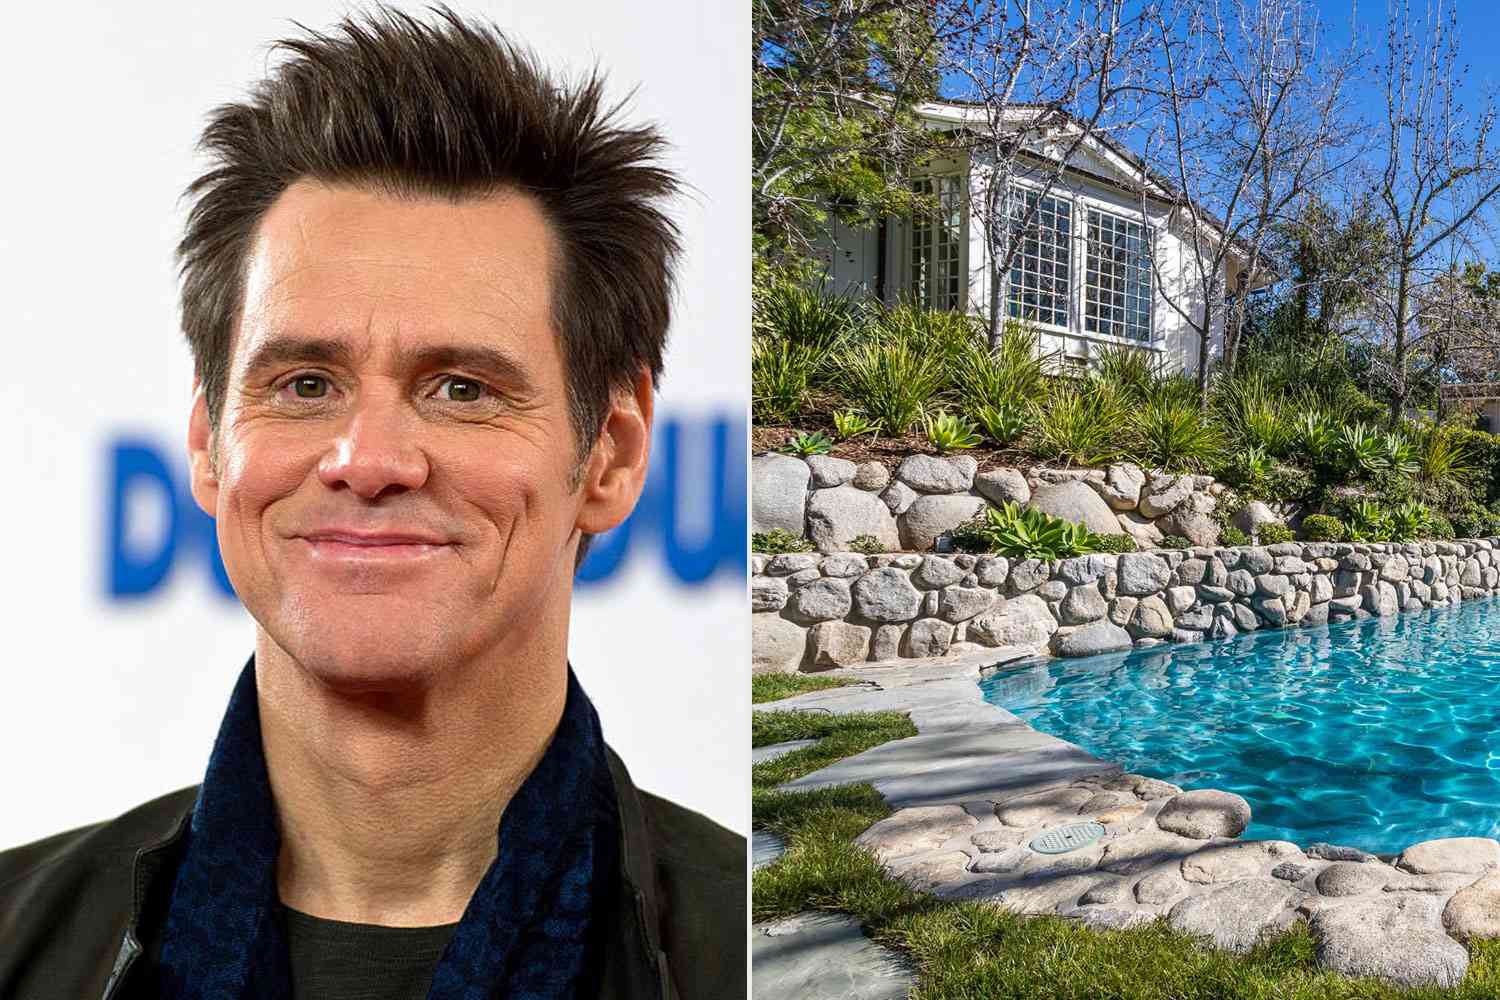 Jim Carrey Cuts Price of Home of 30 Years For Third Time to $22 Million After Over a Year on the Market